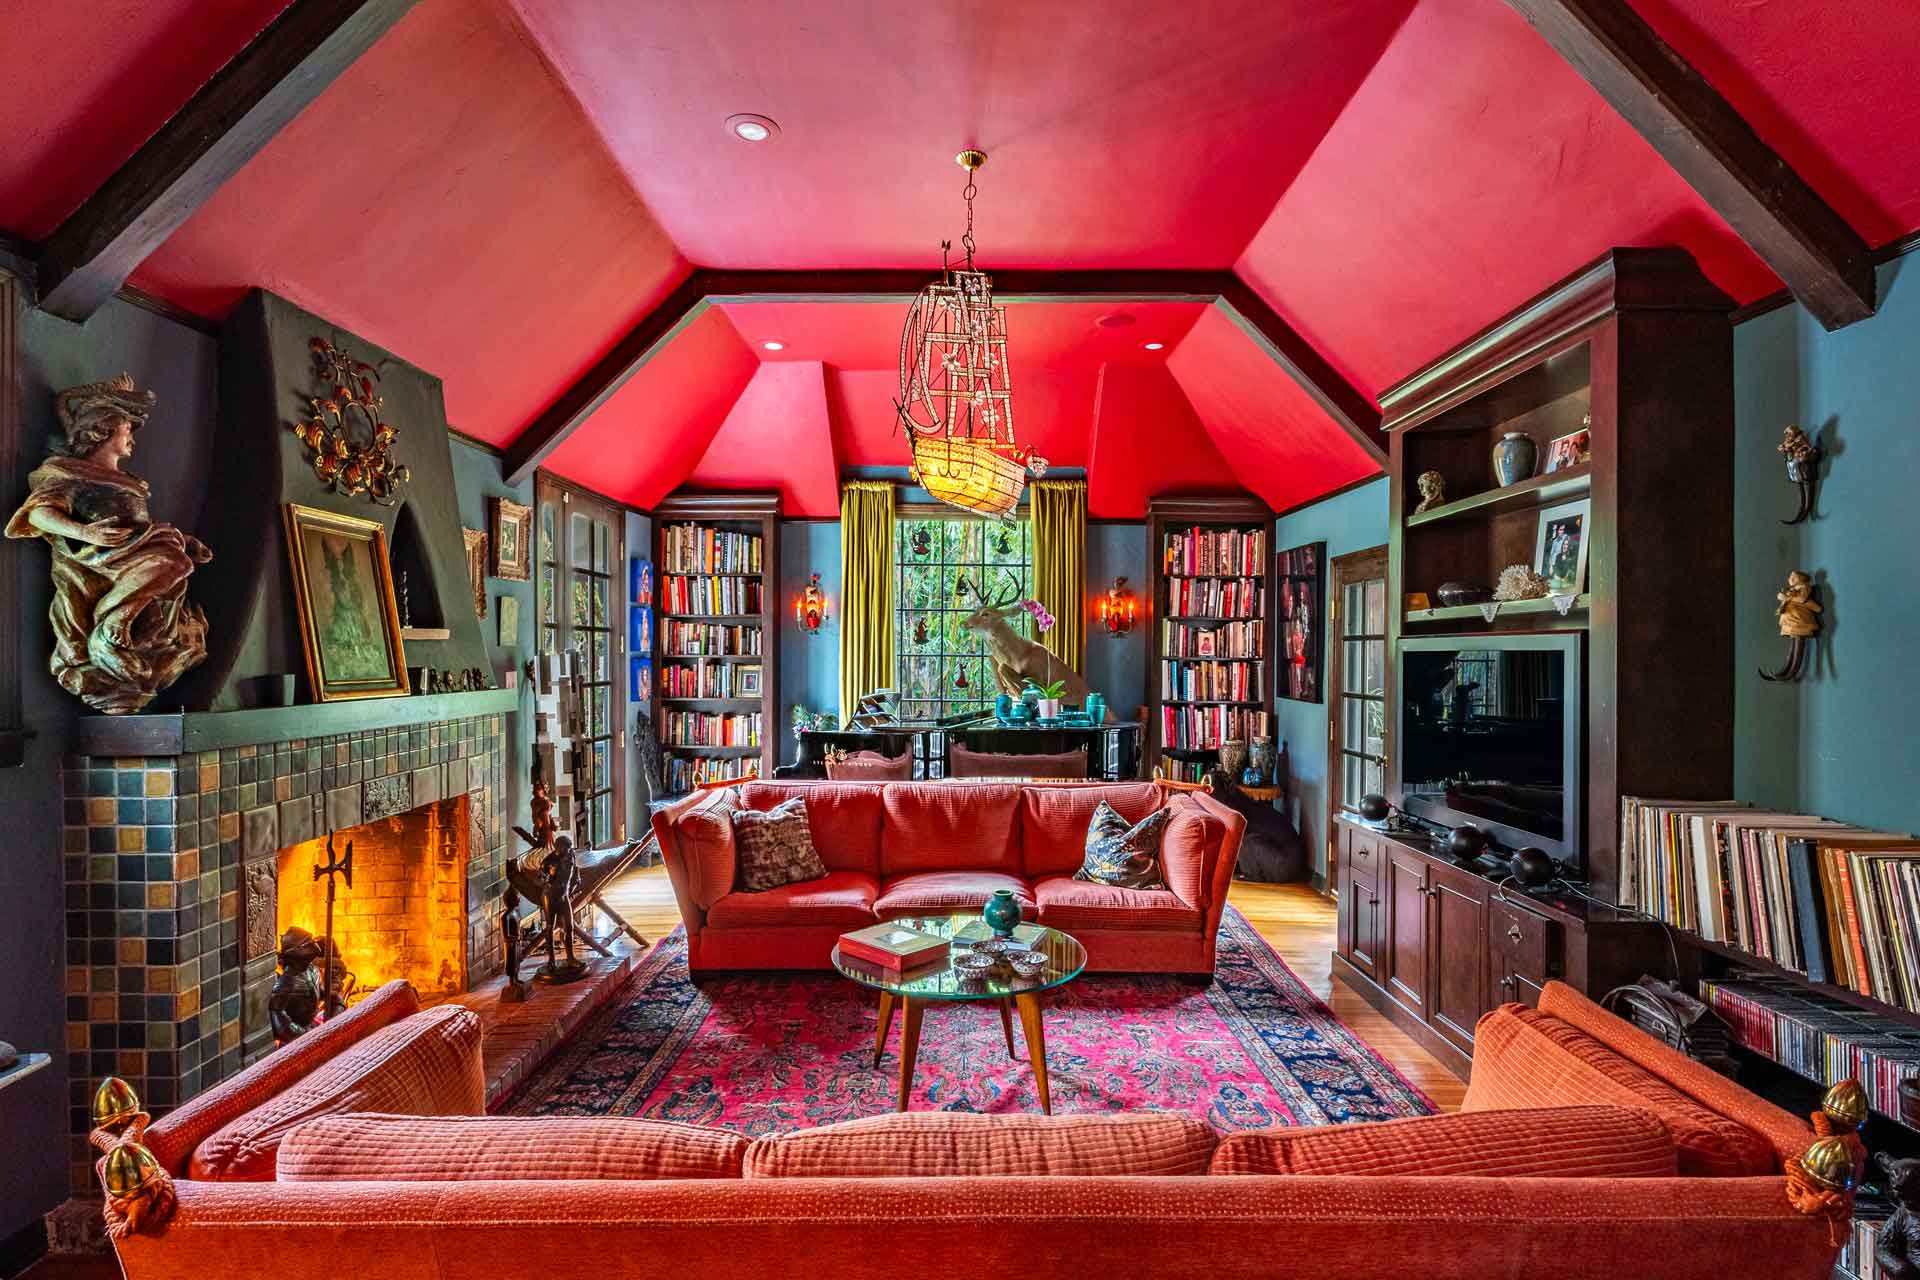 Living room with red walls, a fireplace, and a vaulted ceiling.